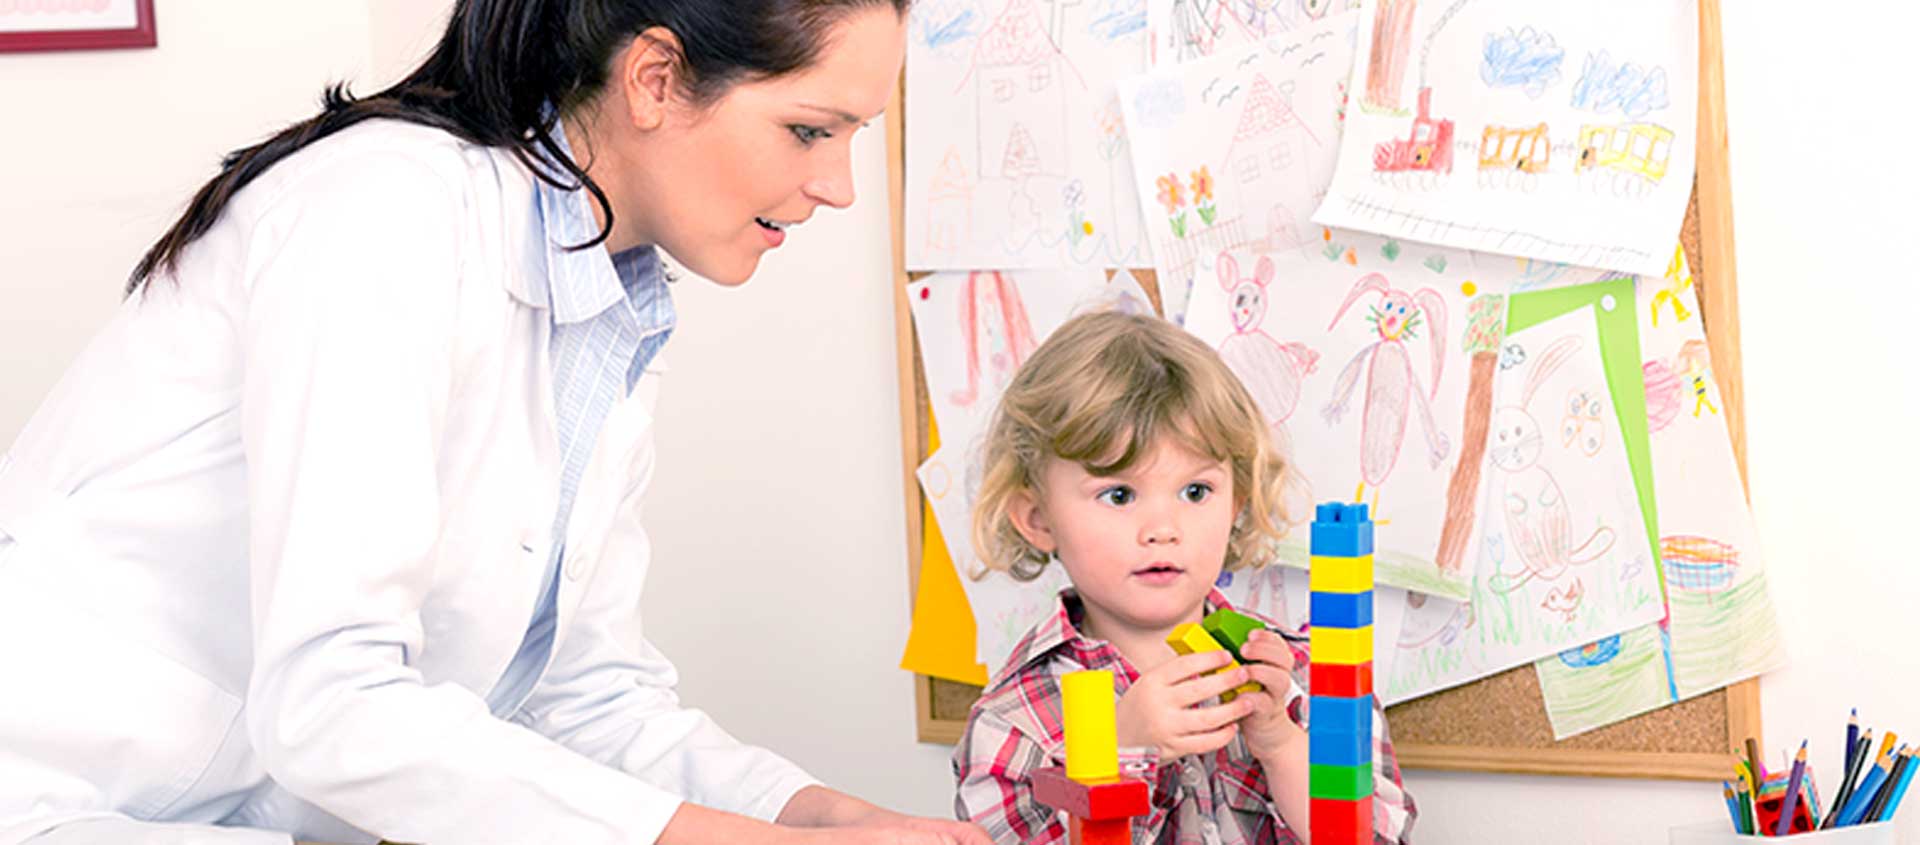 A provider observes a child stacking blocks